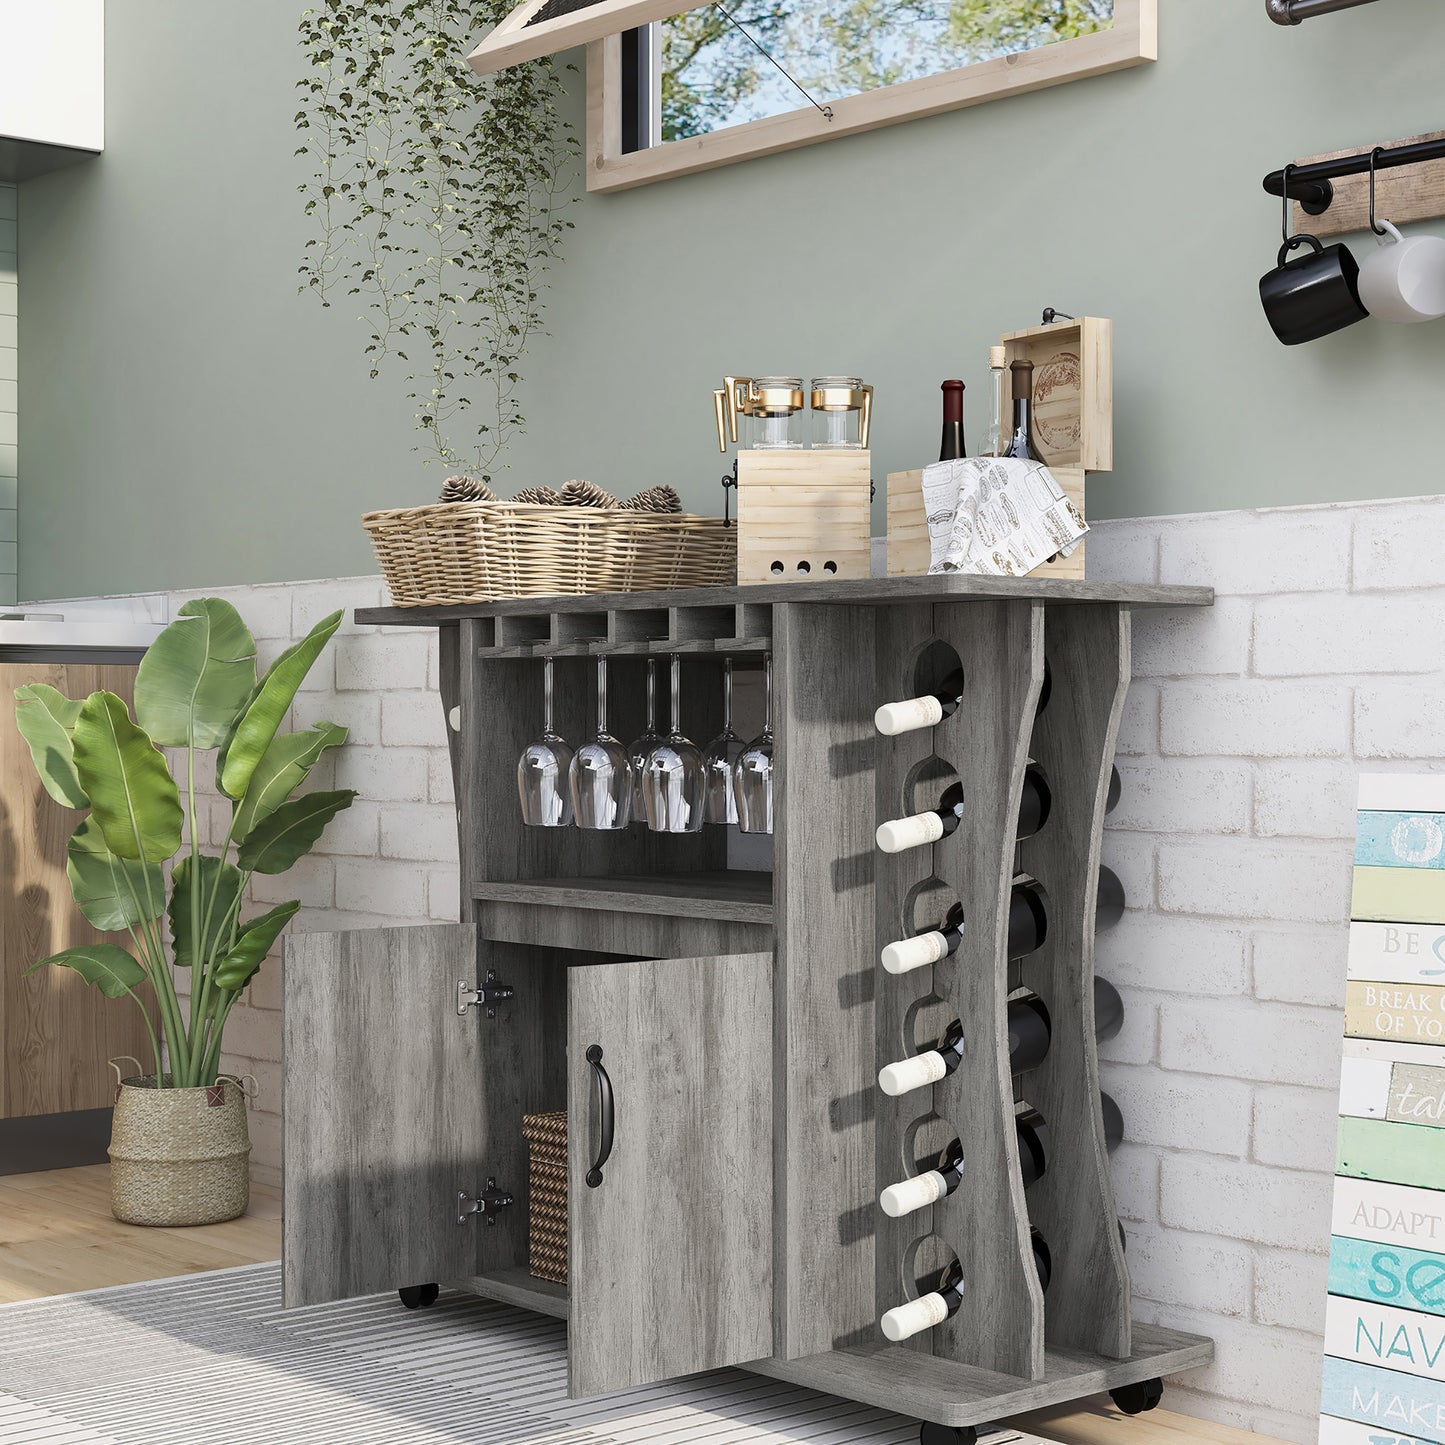 Left angled transitional vintage gray oak two-door mobile bar table with bottle and stemware racks and doors open in a dining room with accessories